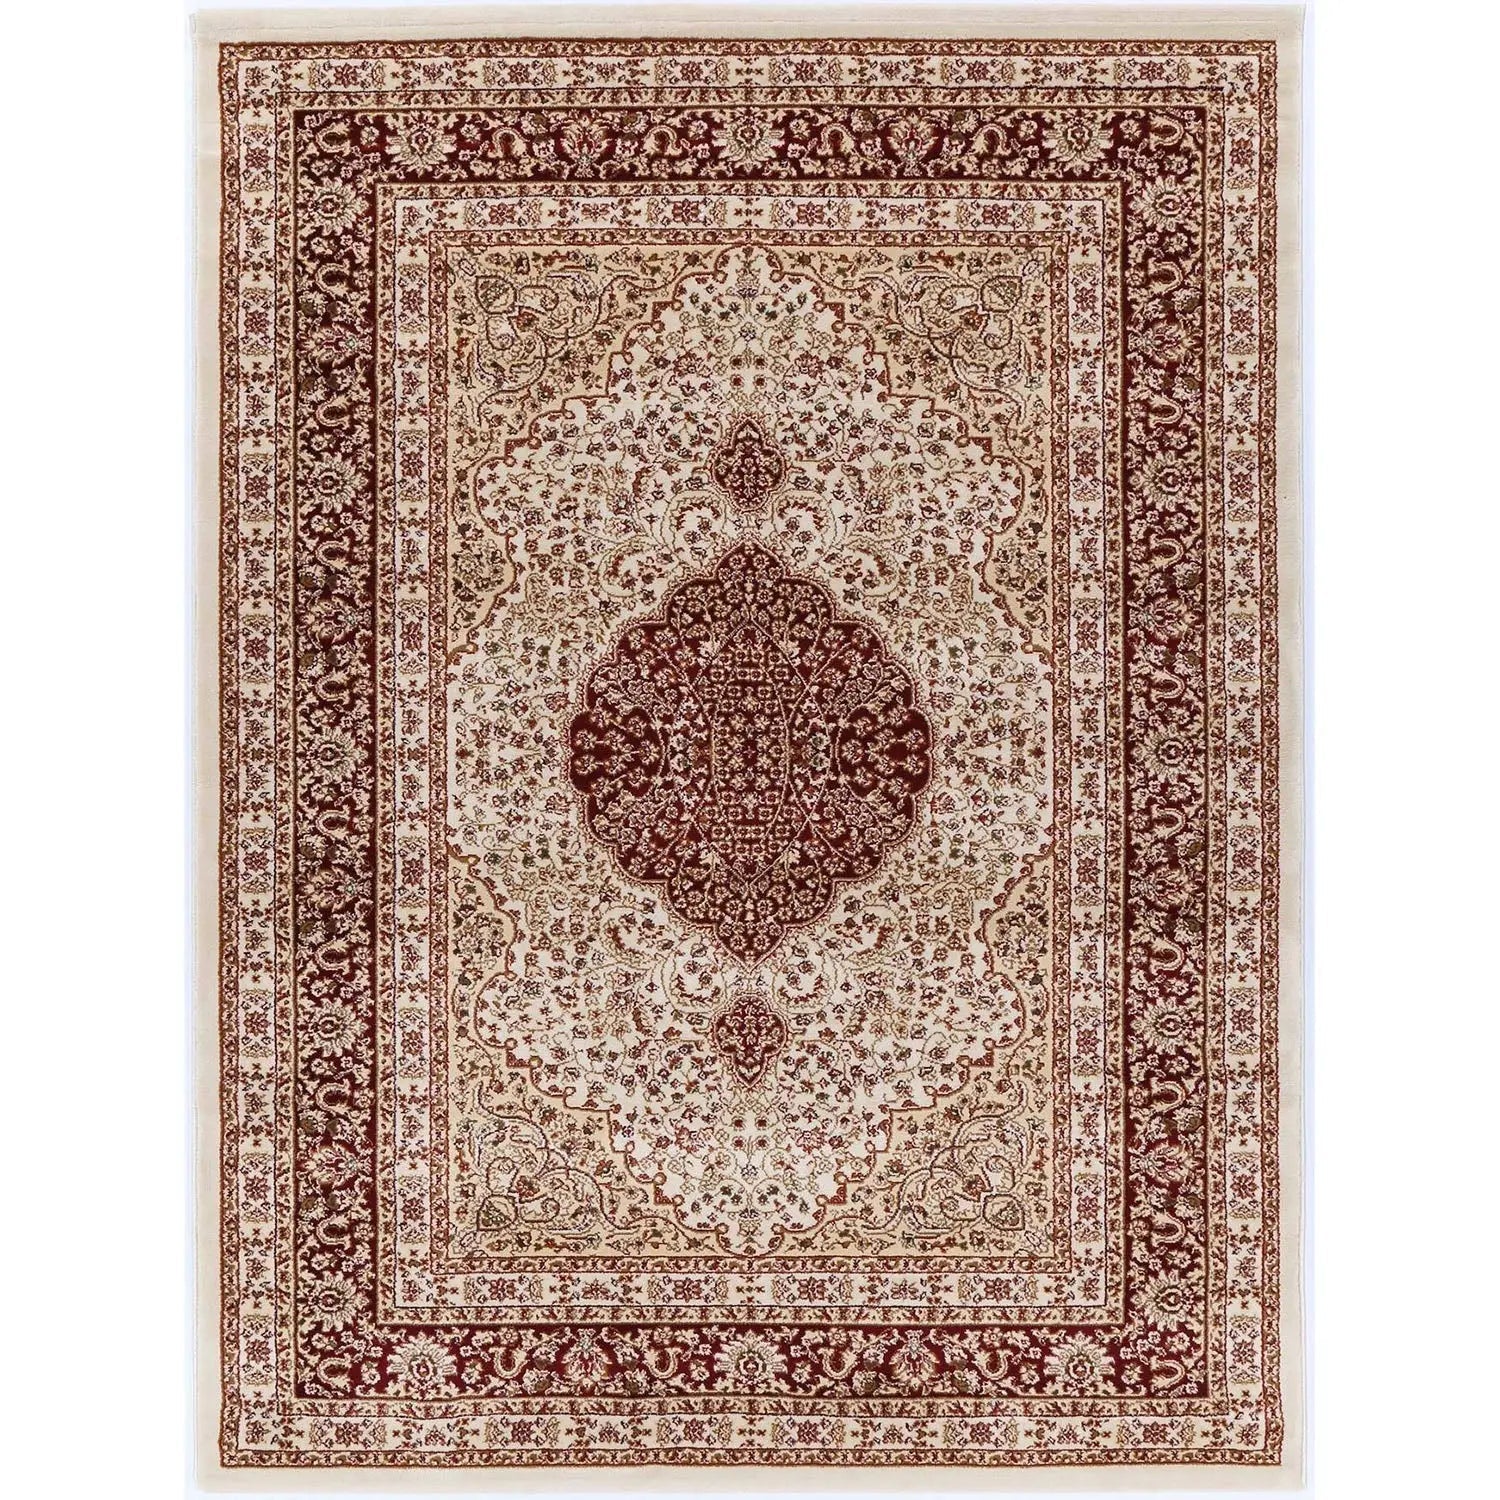 Suzani Red and Cream Medallion Traditional Rug - Rugs - Rugs a Million